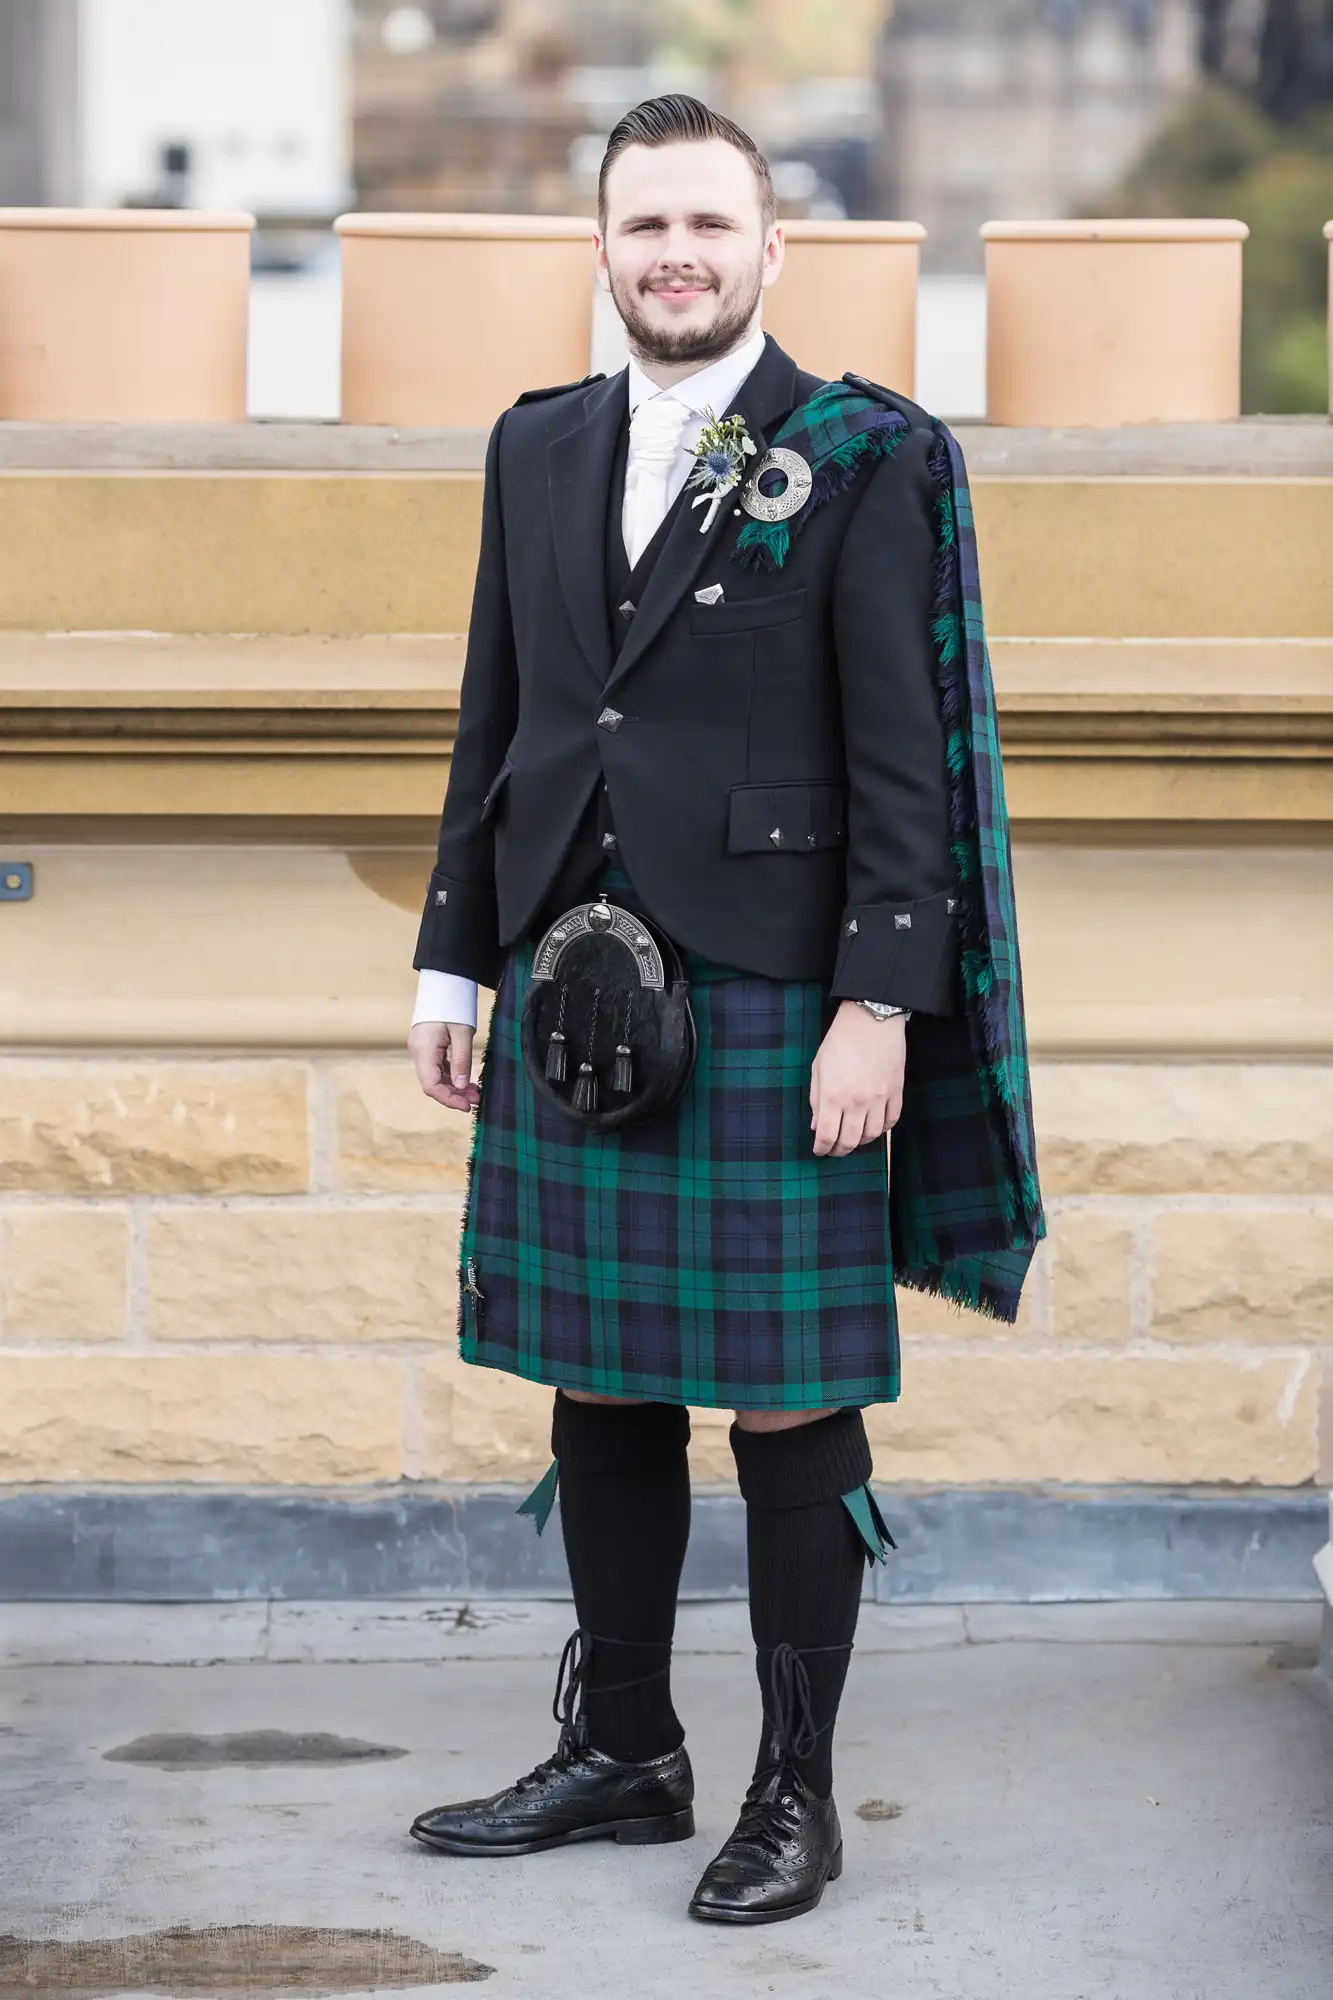 Man in traditional scottish attire, including a tartan kilt and sporran, smiling outdoors.